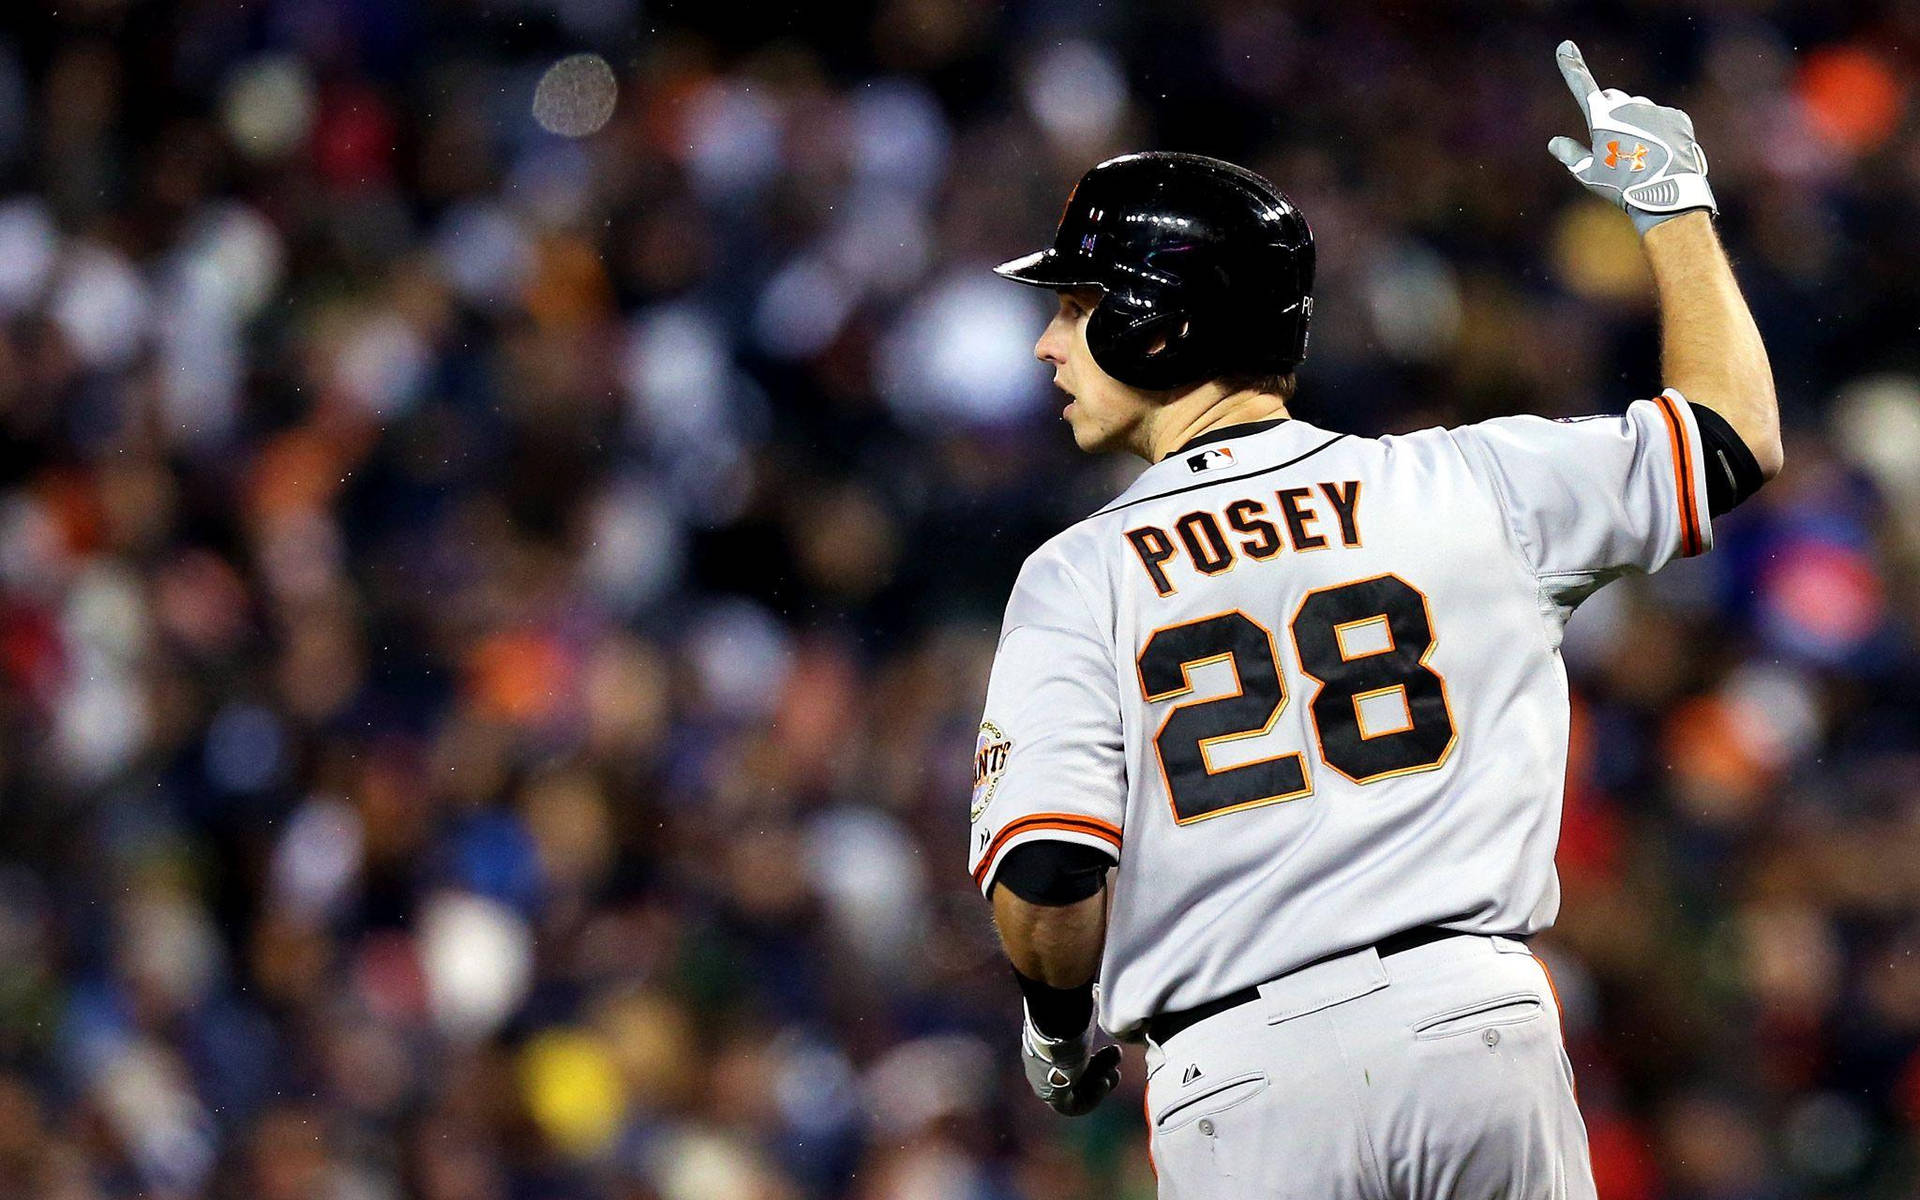 100+] Buster Posey Wallpapers